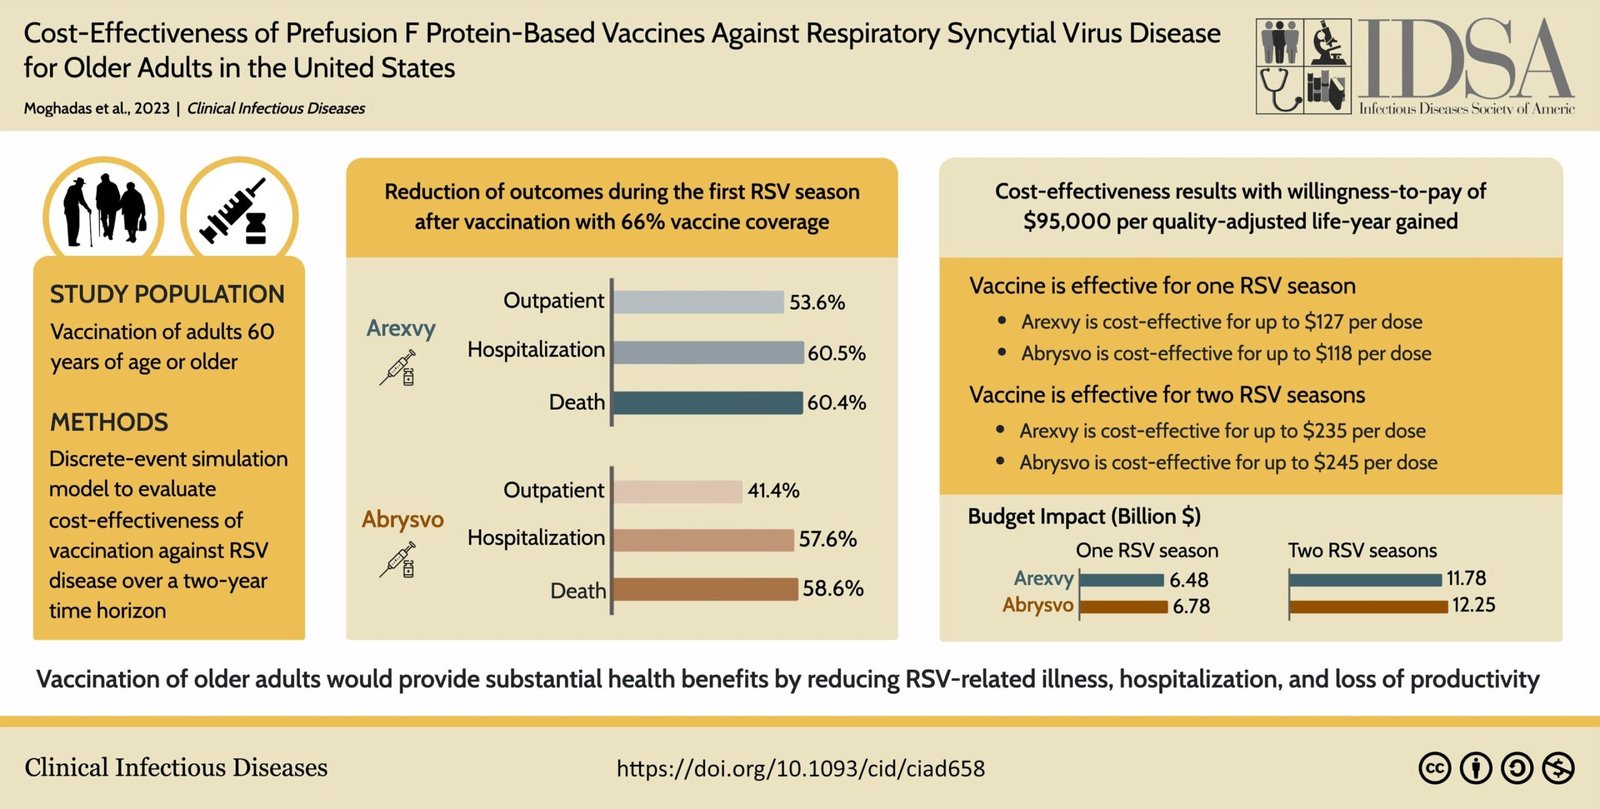 RSV vaccines would greatly reduce illness if implemented like flu shots research suggests